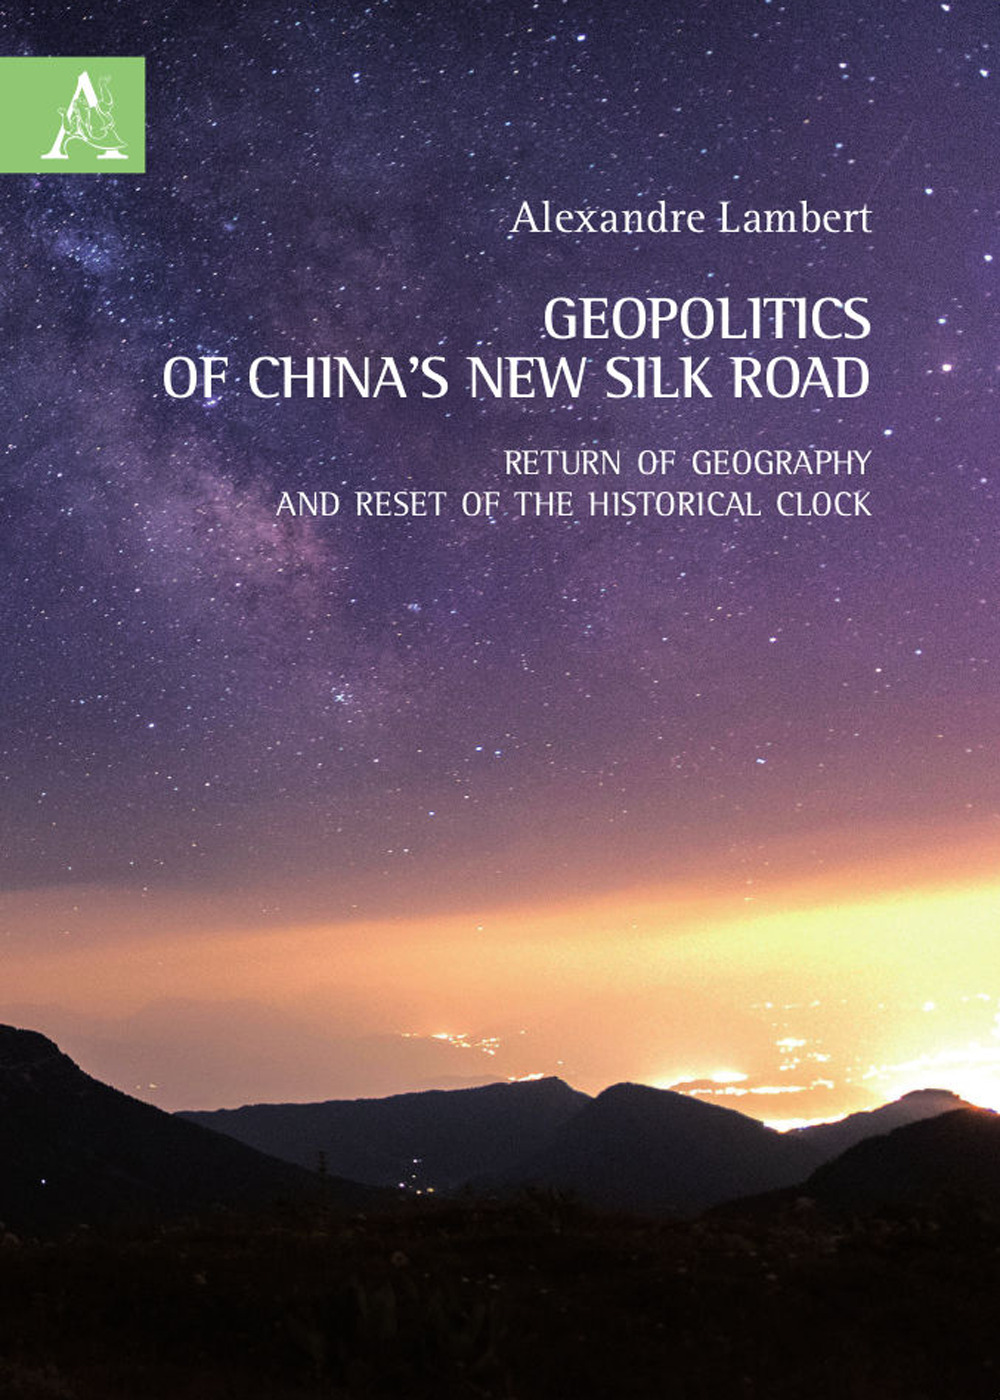 Geopolitics of China's new silk road. Return of geography and reset of the historical clock